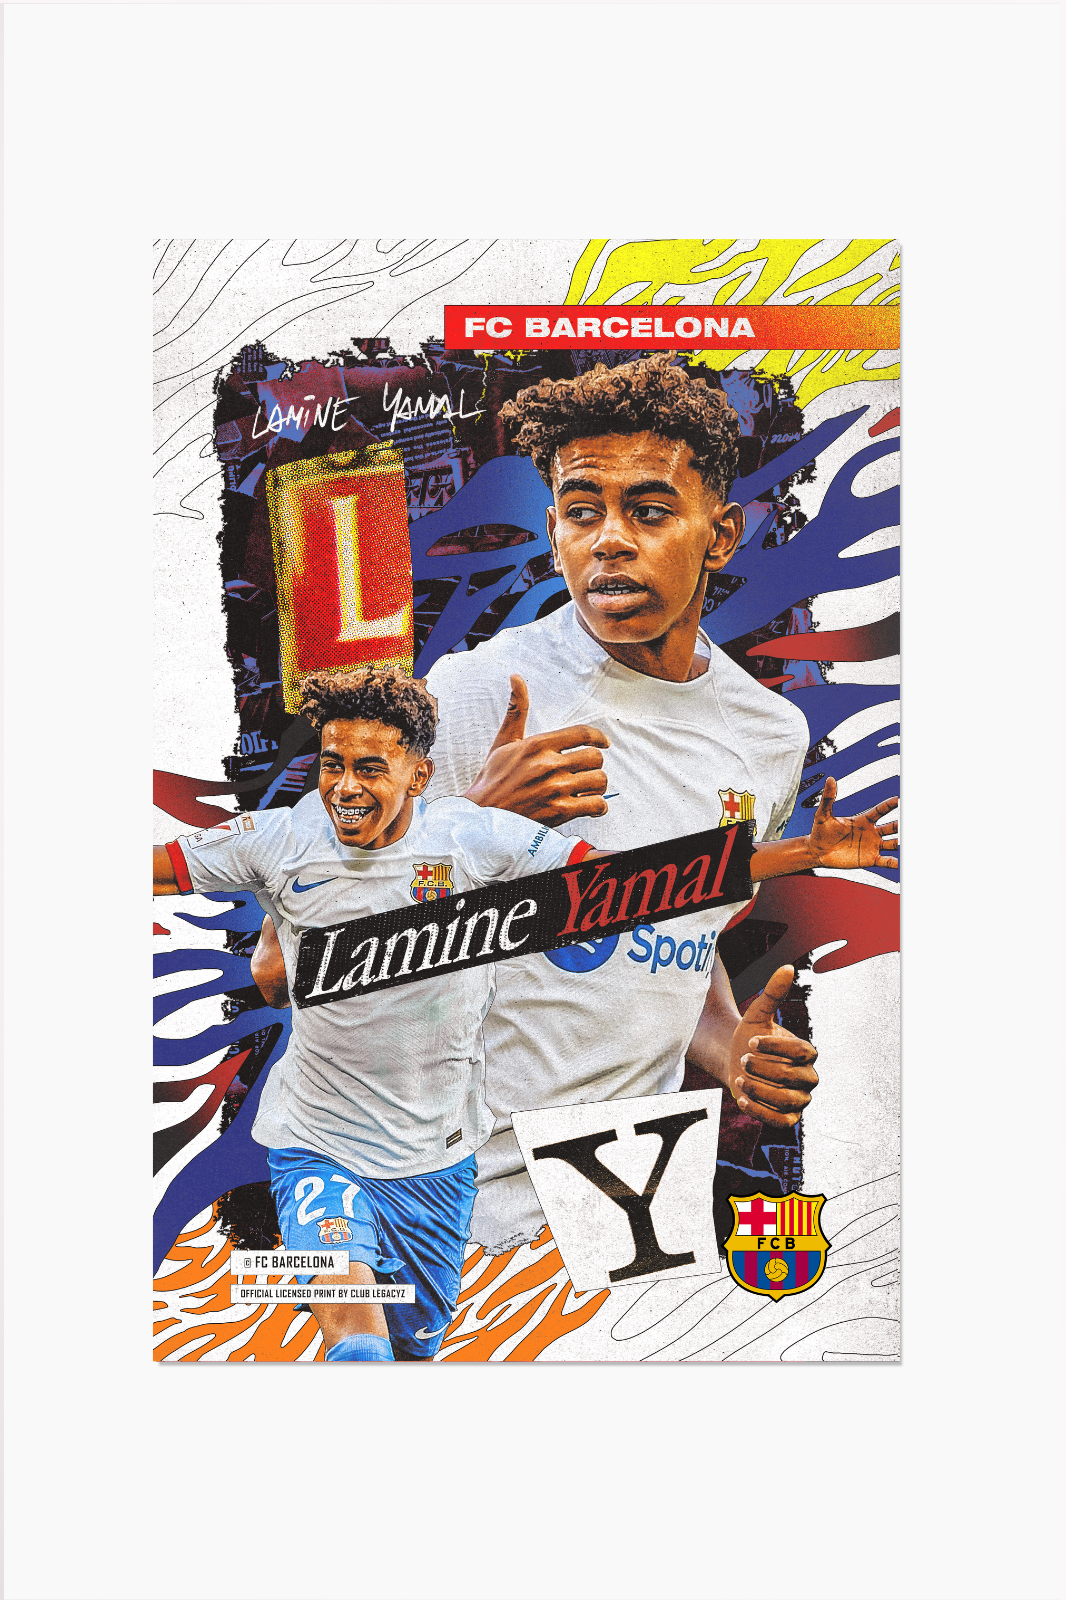 FC Barcelona - Poster Lamine Yamal 999 exemplaires